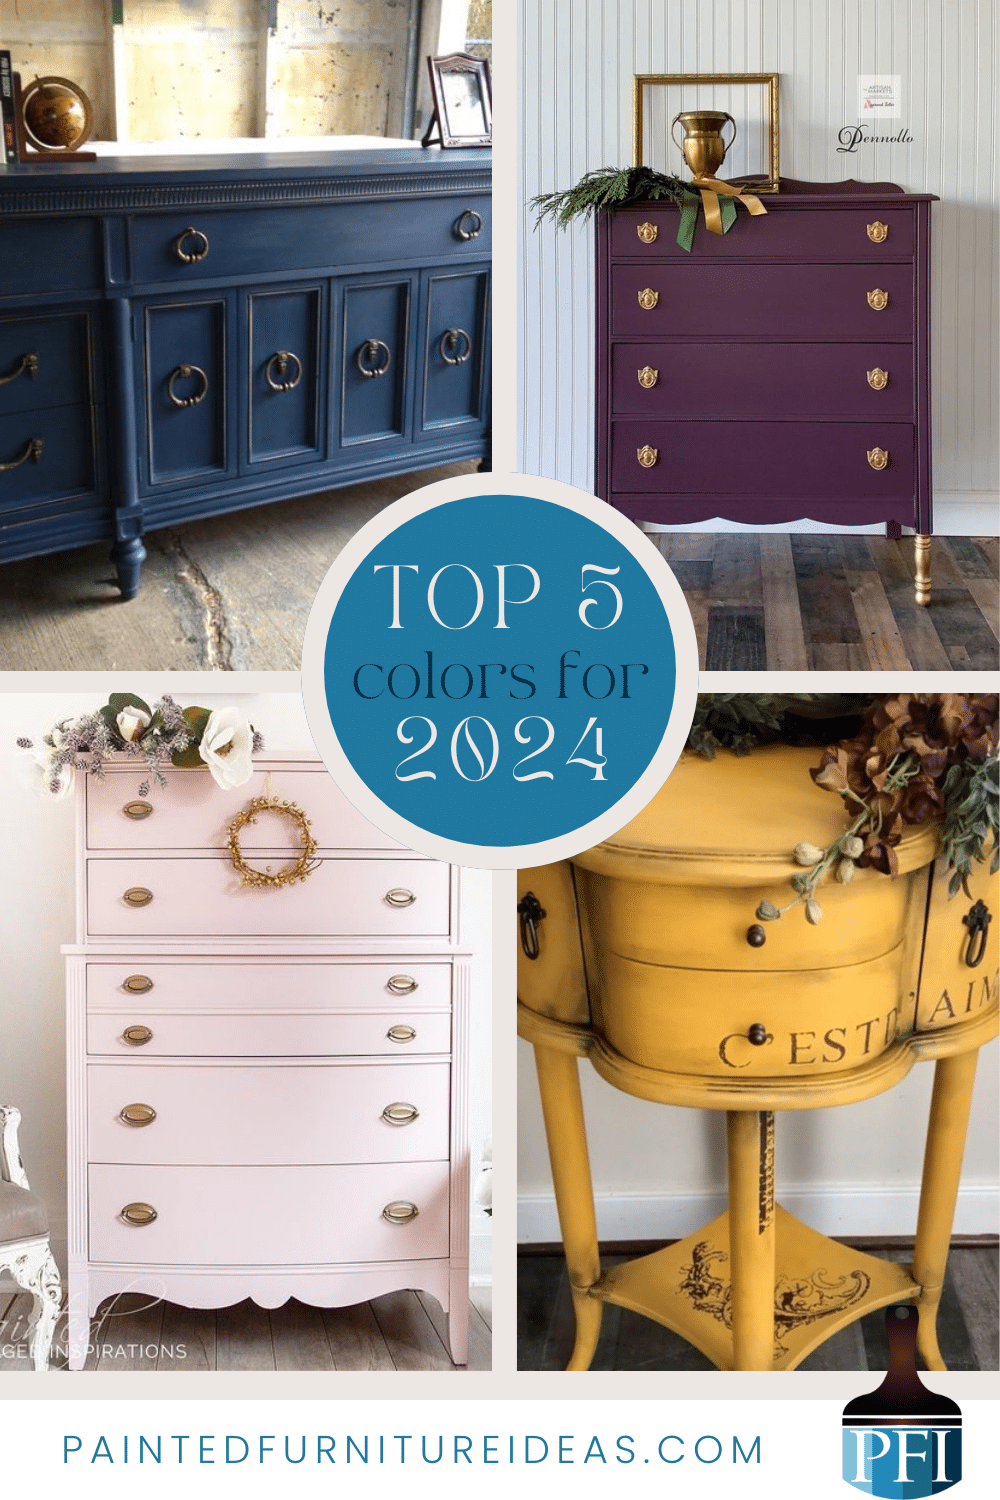 Hottest Hues for 2024: 5 Most Popular Pinterest Furniture Paint Colors -  Painted Furniture Ideas